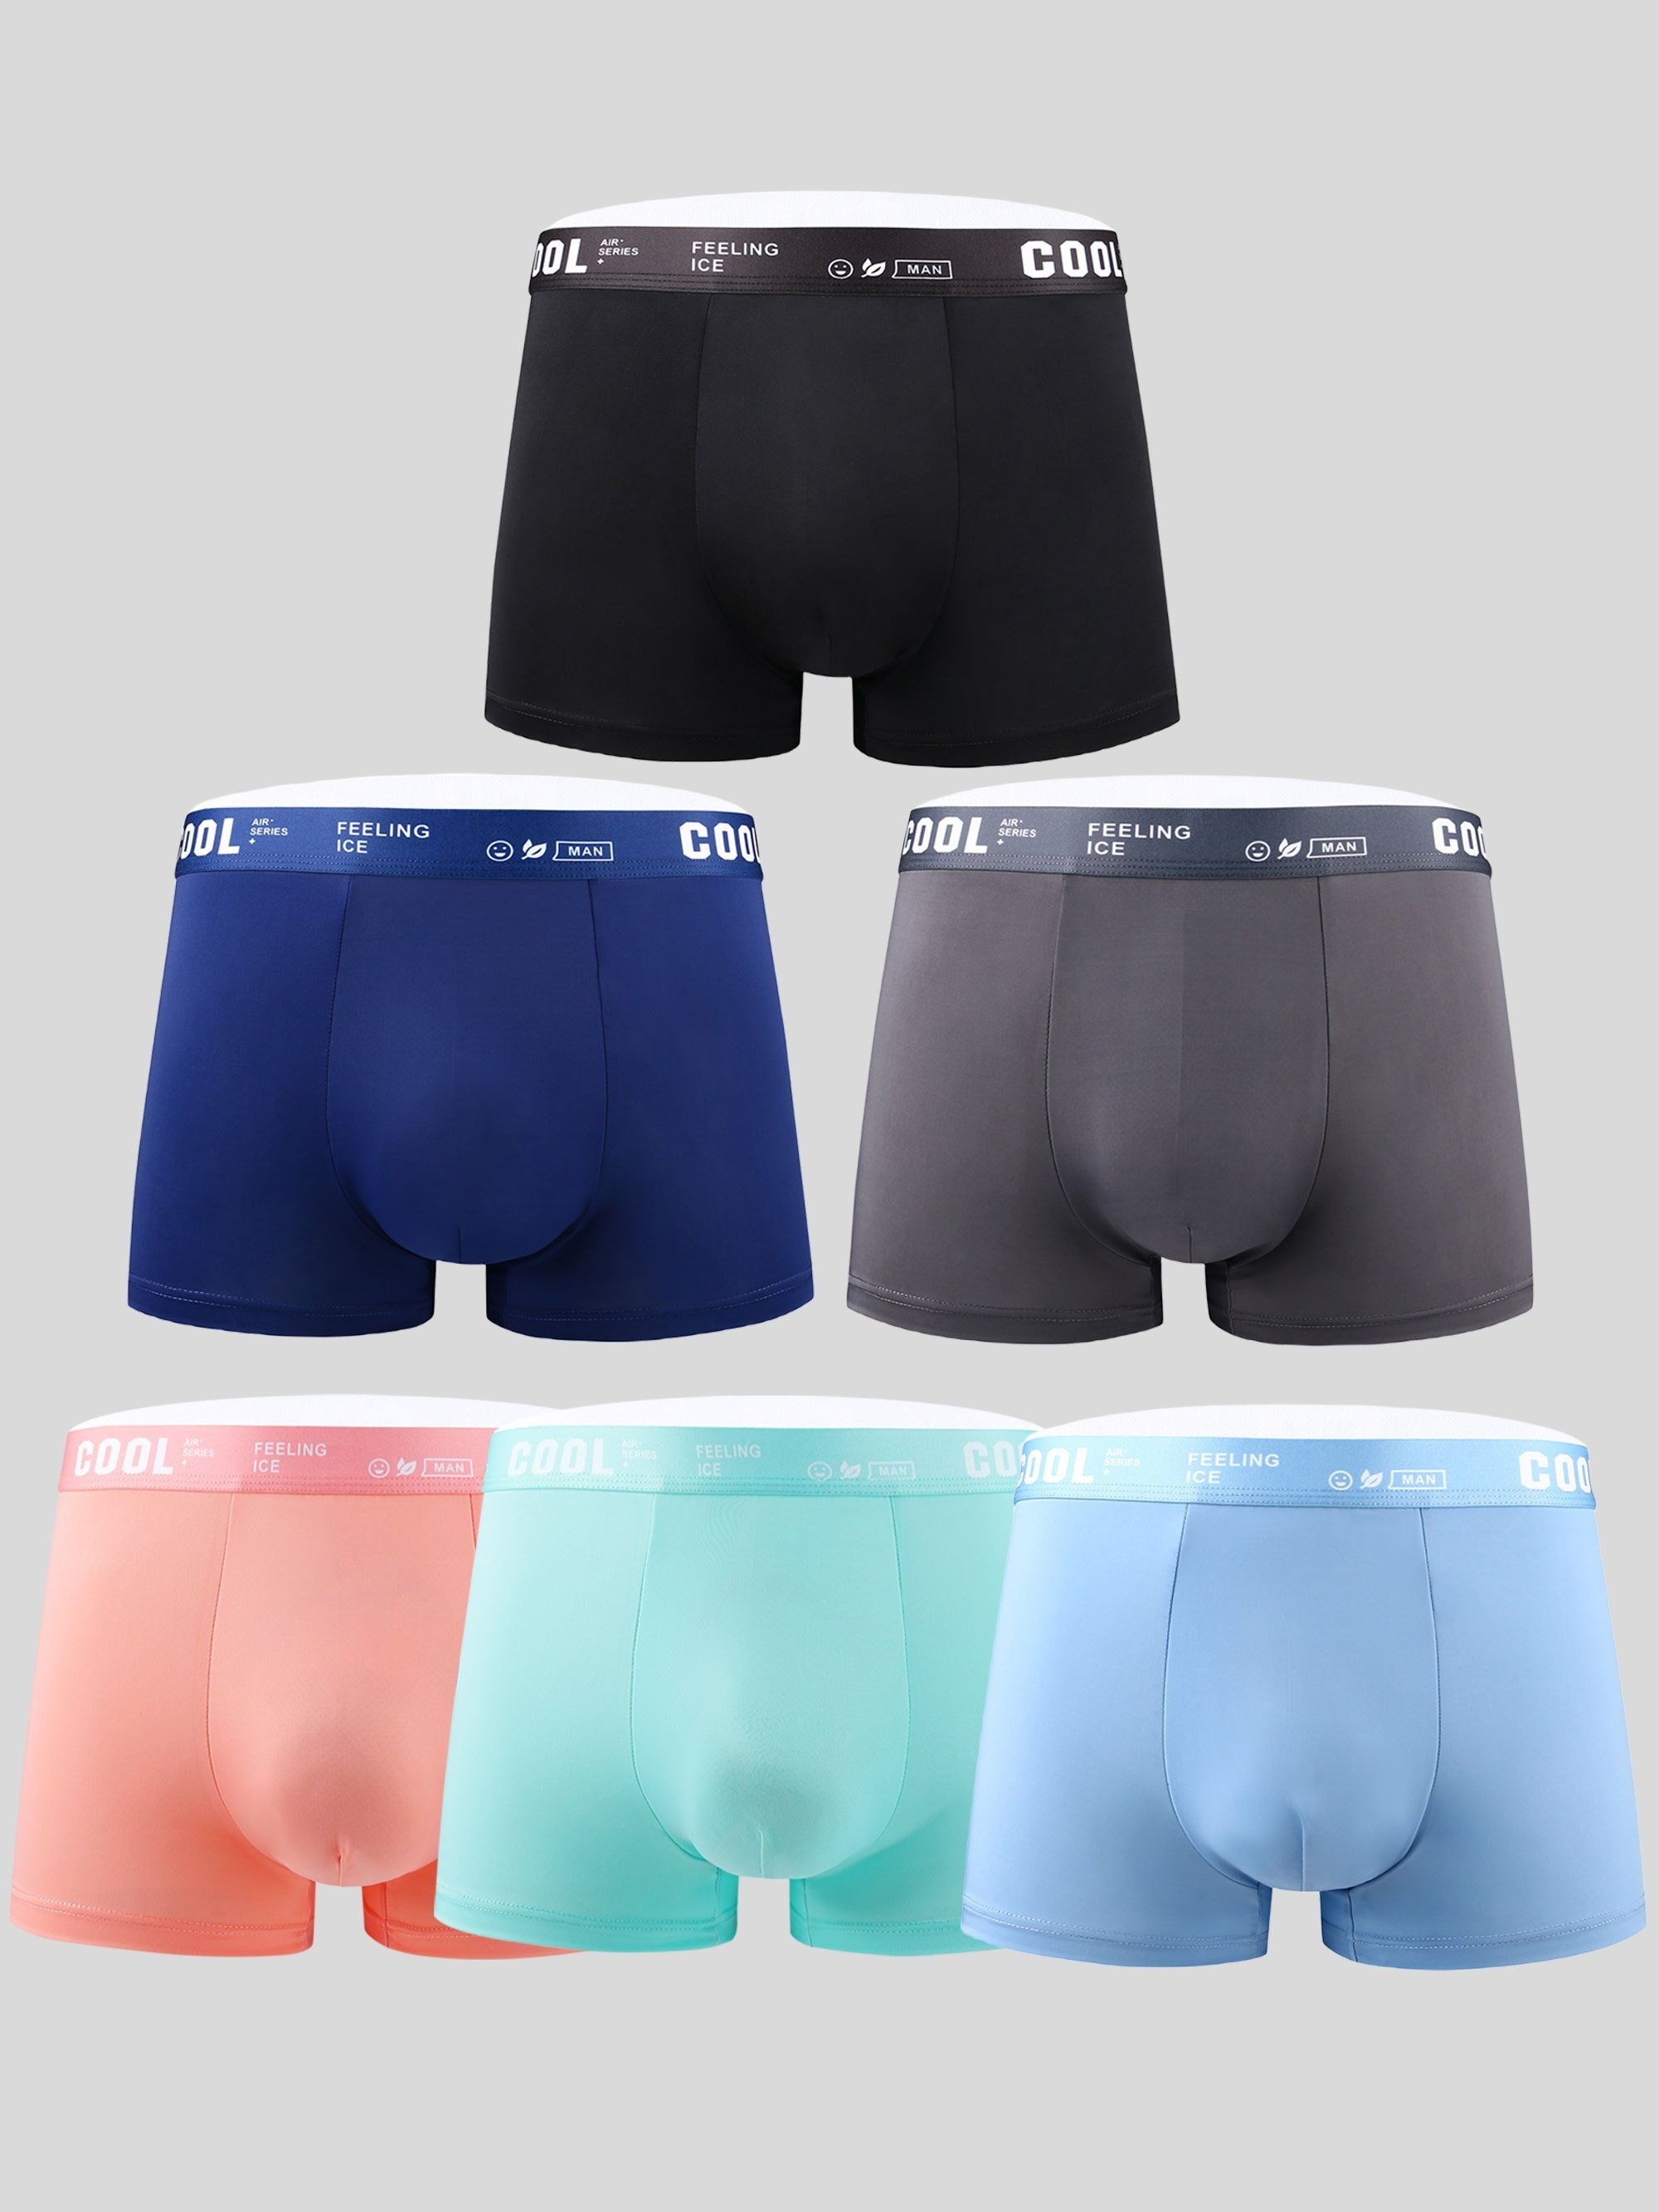 Men's Sexy Thin Style Summer High-end Embroidered Underwear, Breathable  Lace Semi-transparent Low-waist Men's Sexy Boxer Briefs